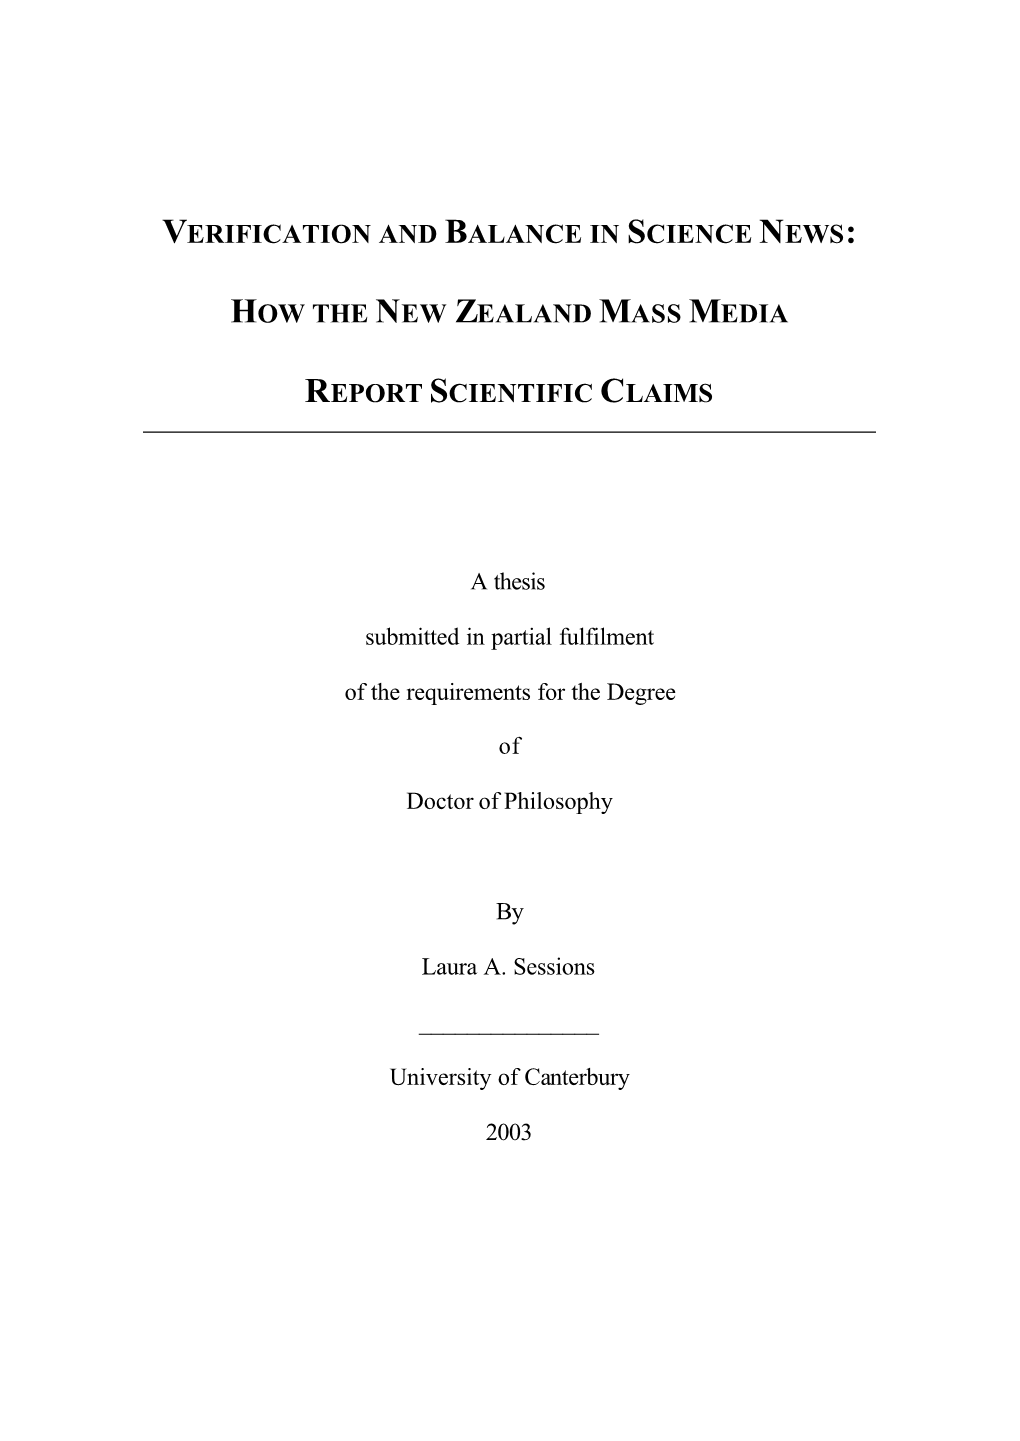 43. Verification and Balance in Science News: How the New Zealand Mass